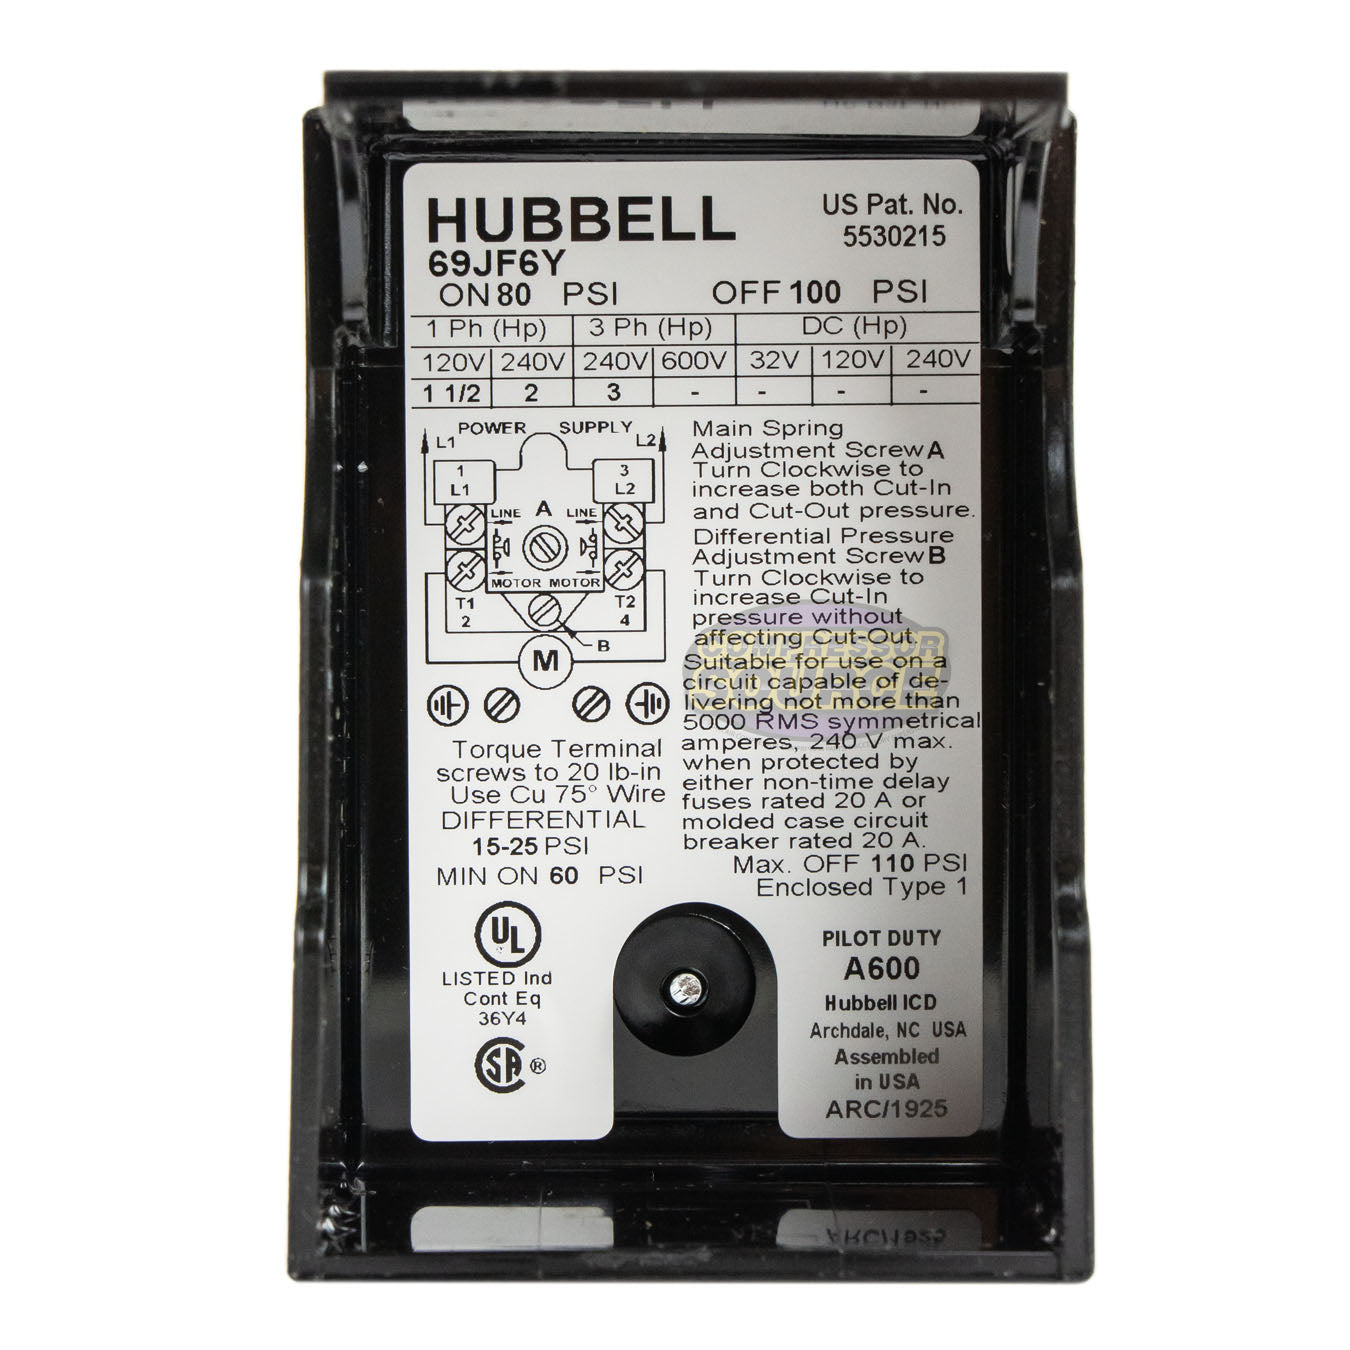 Hubbell 69JF6Y Furnas Air Compressor Pressure Switch Control Valve 80-100 PSI